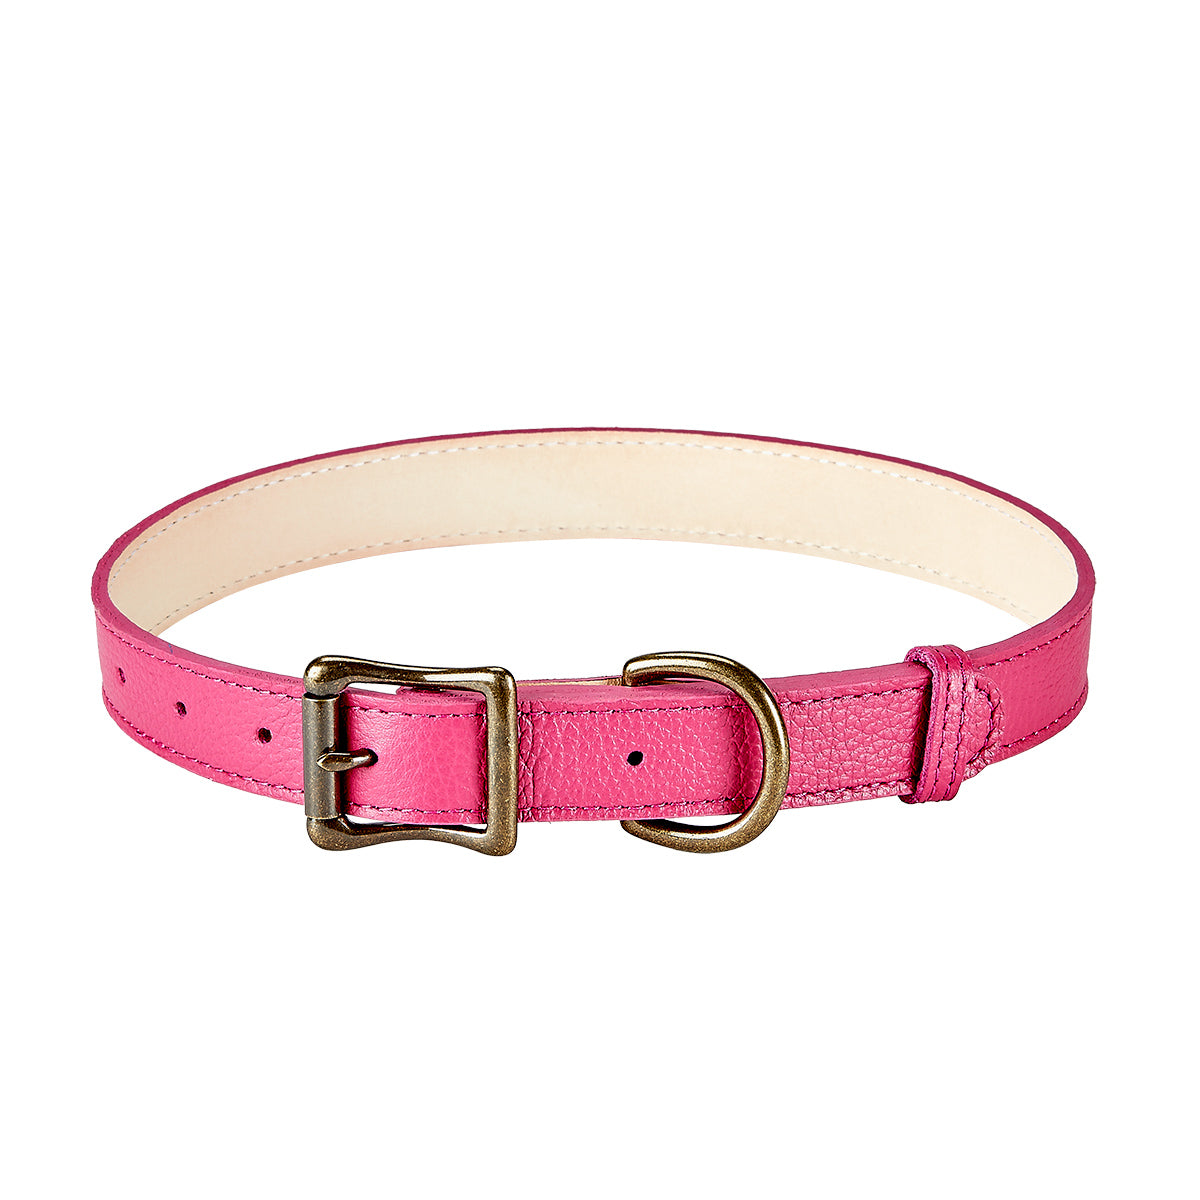 Graphic Image Large Dog Collar Pink Pebble Grain Leather